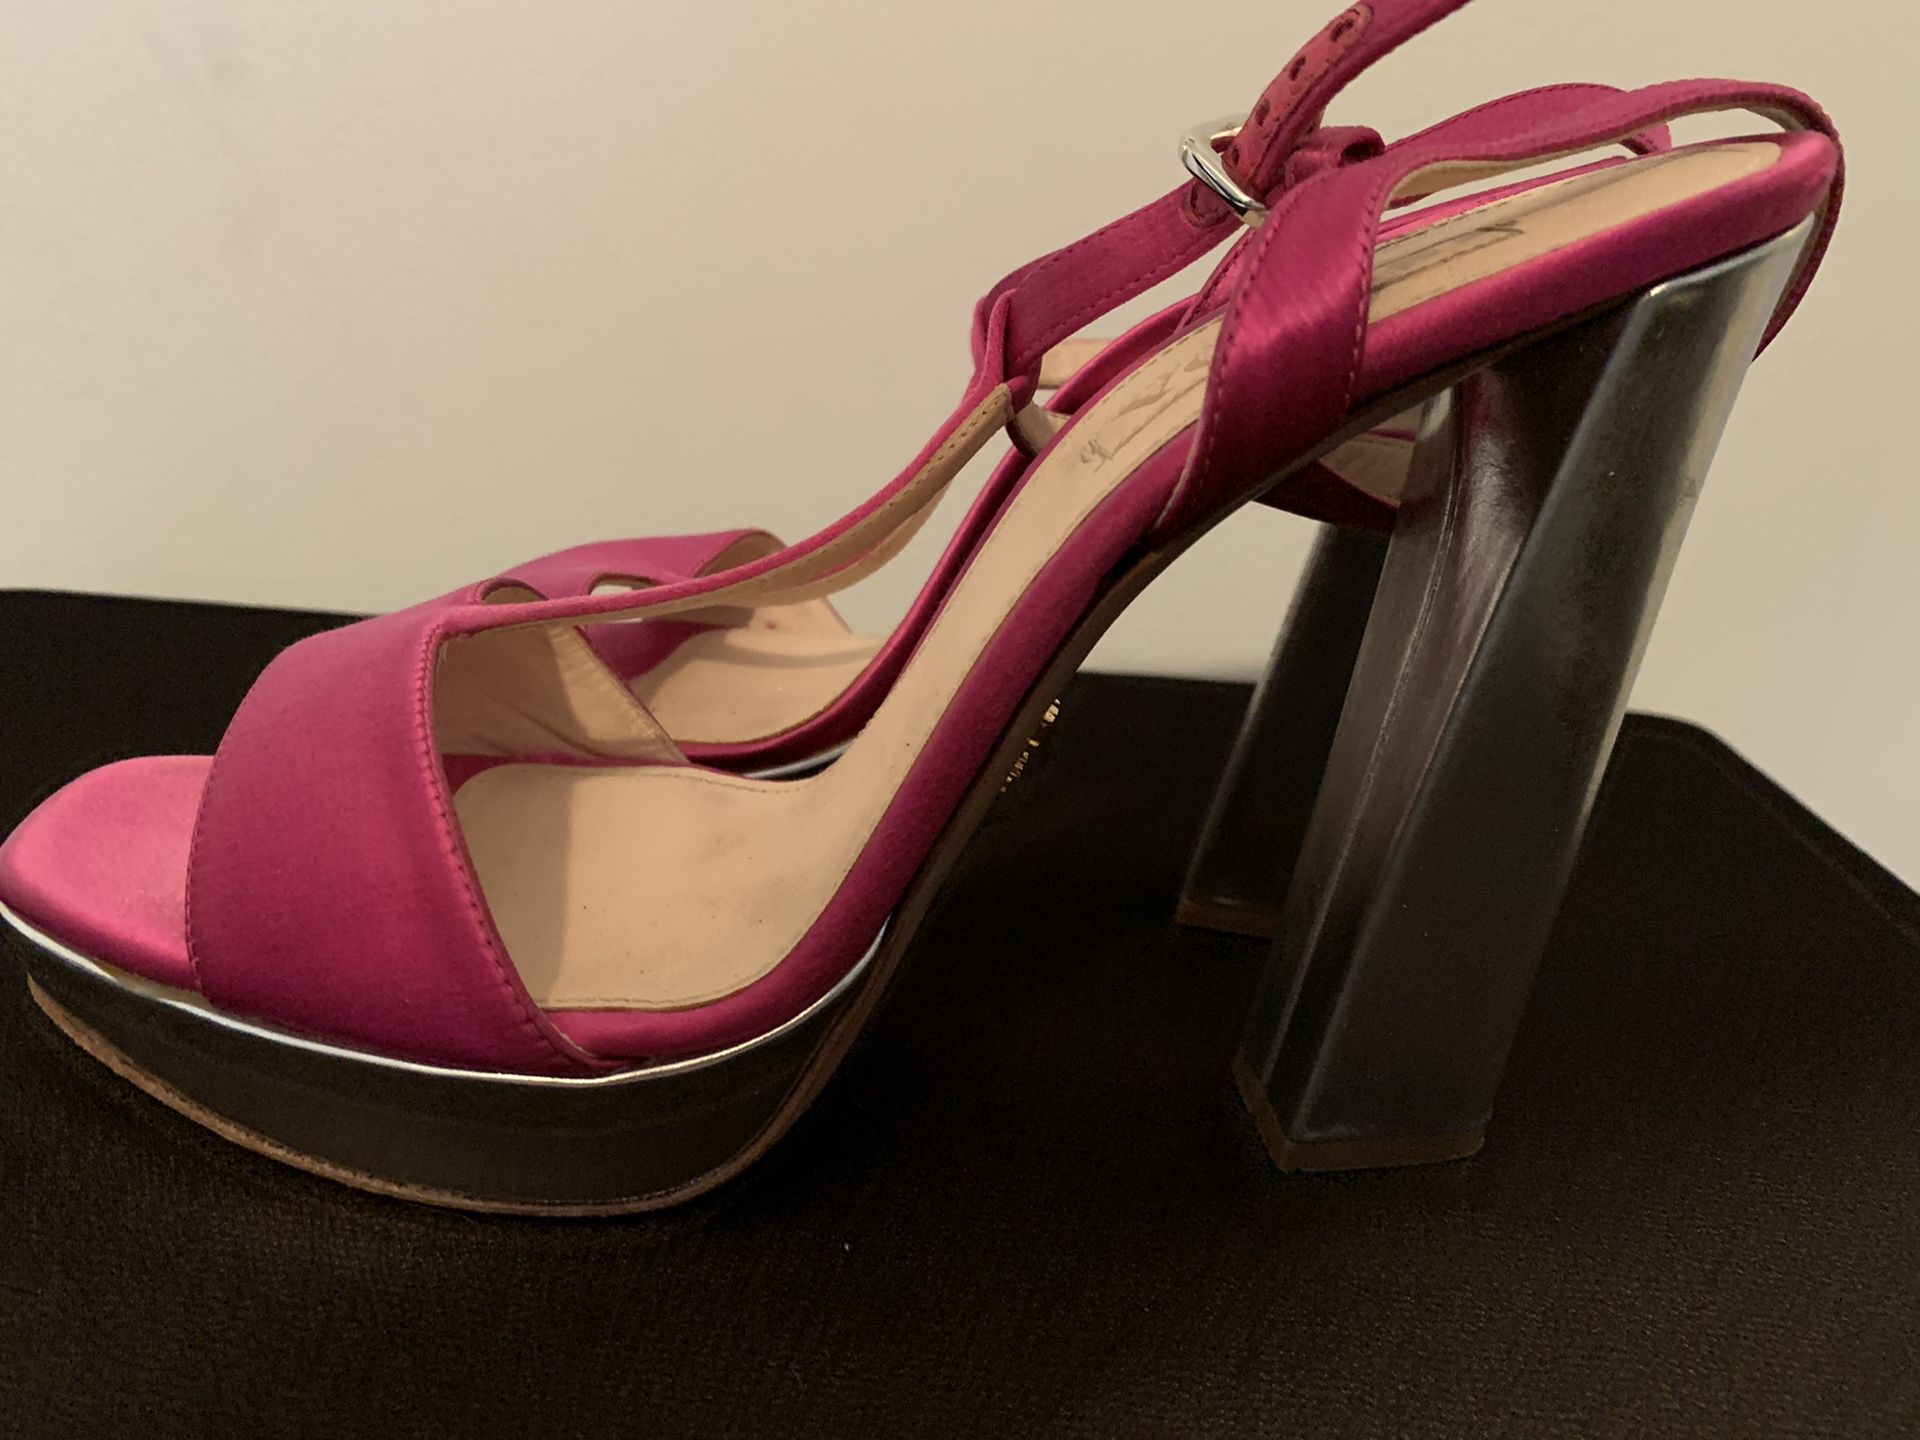 Prada Gorgeous pink and silver heels